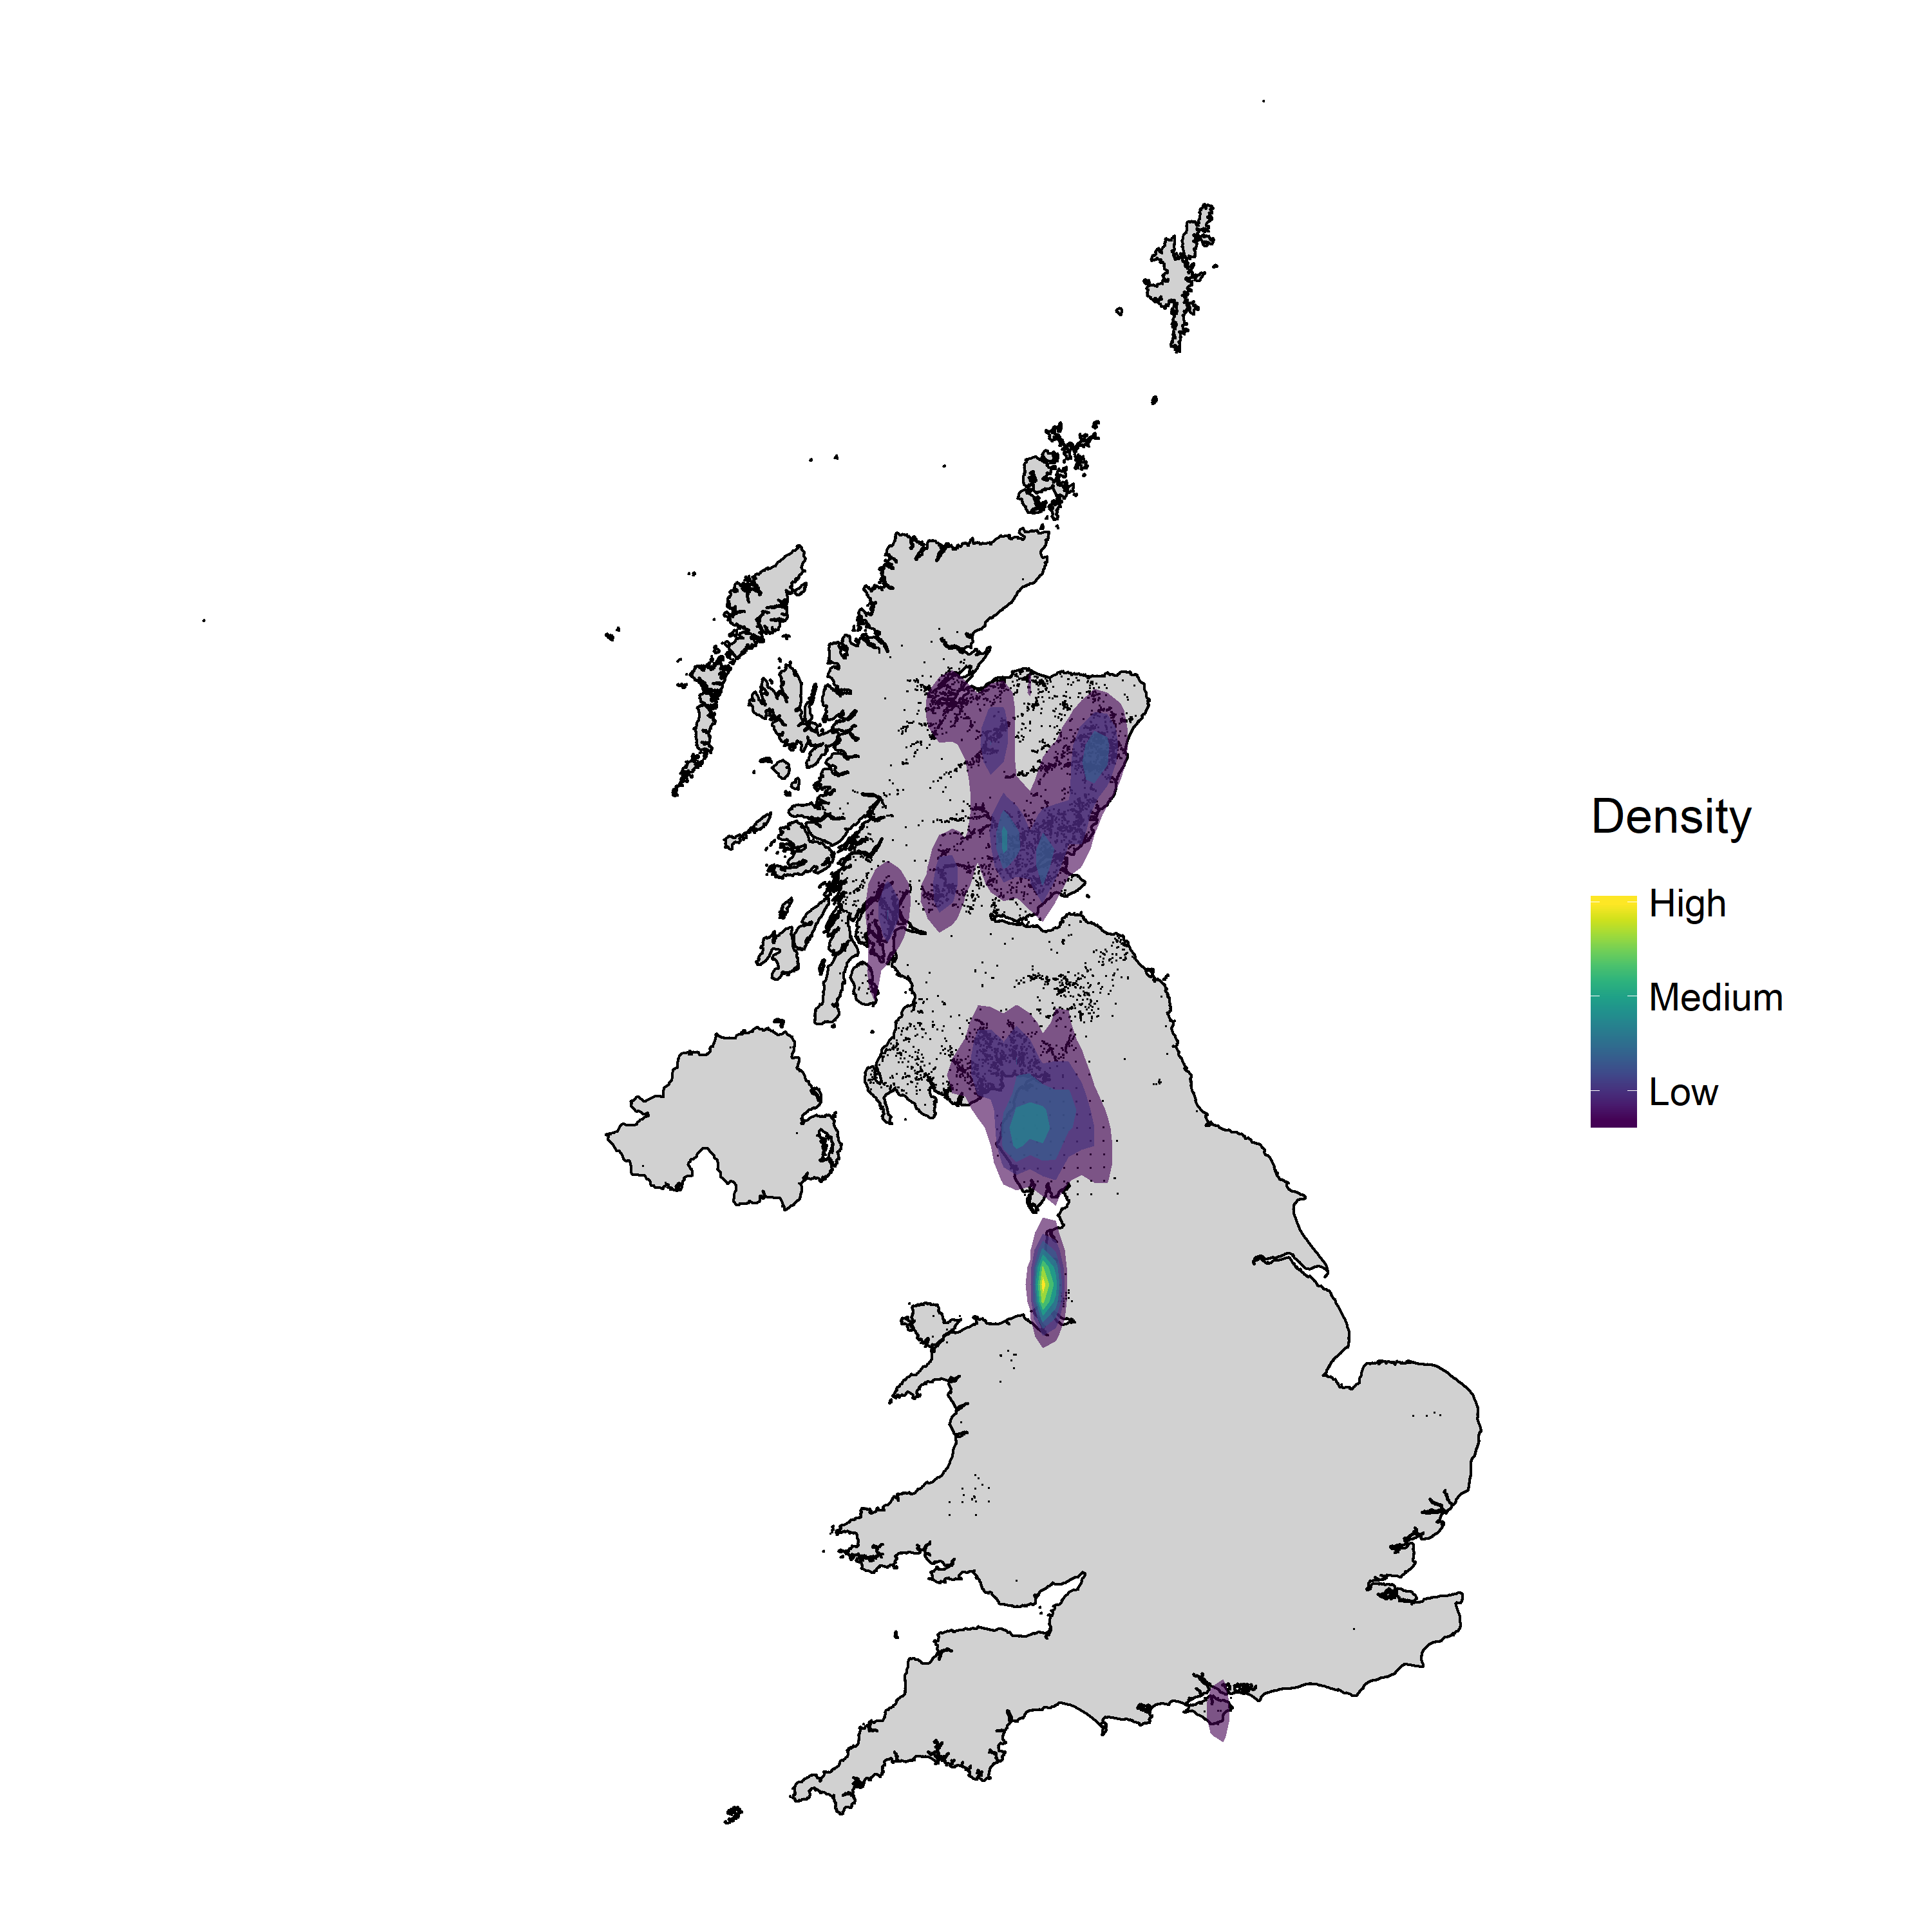 Density heatmap of red squirrels in the UK